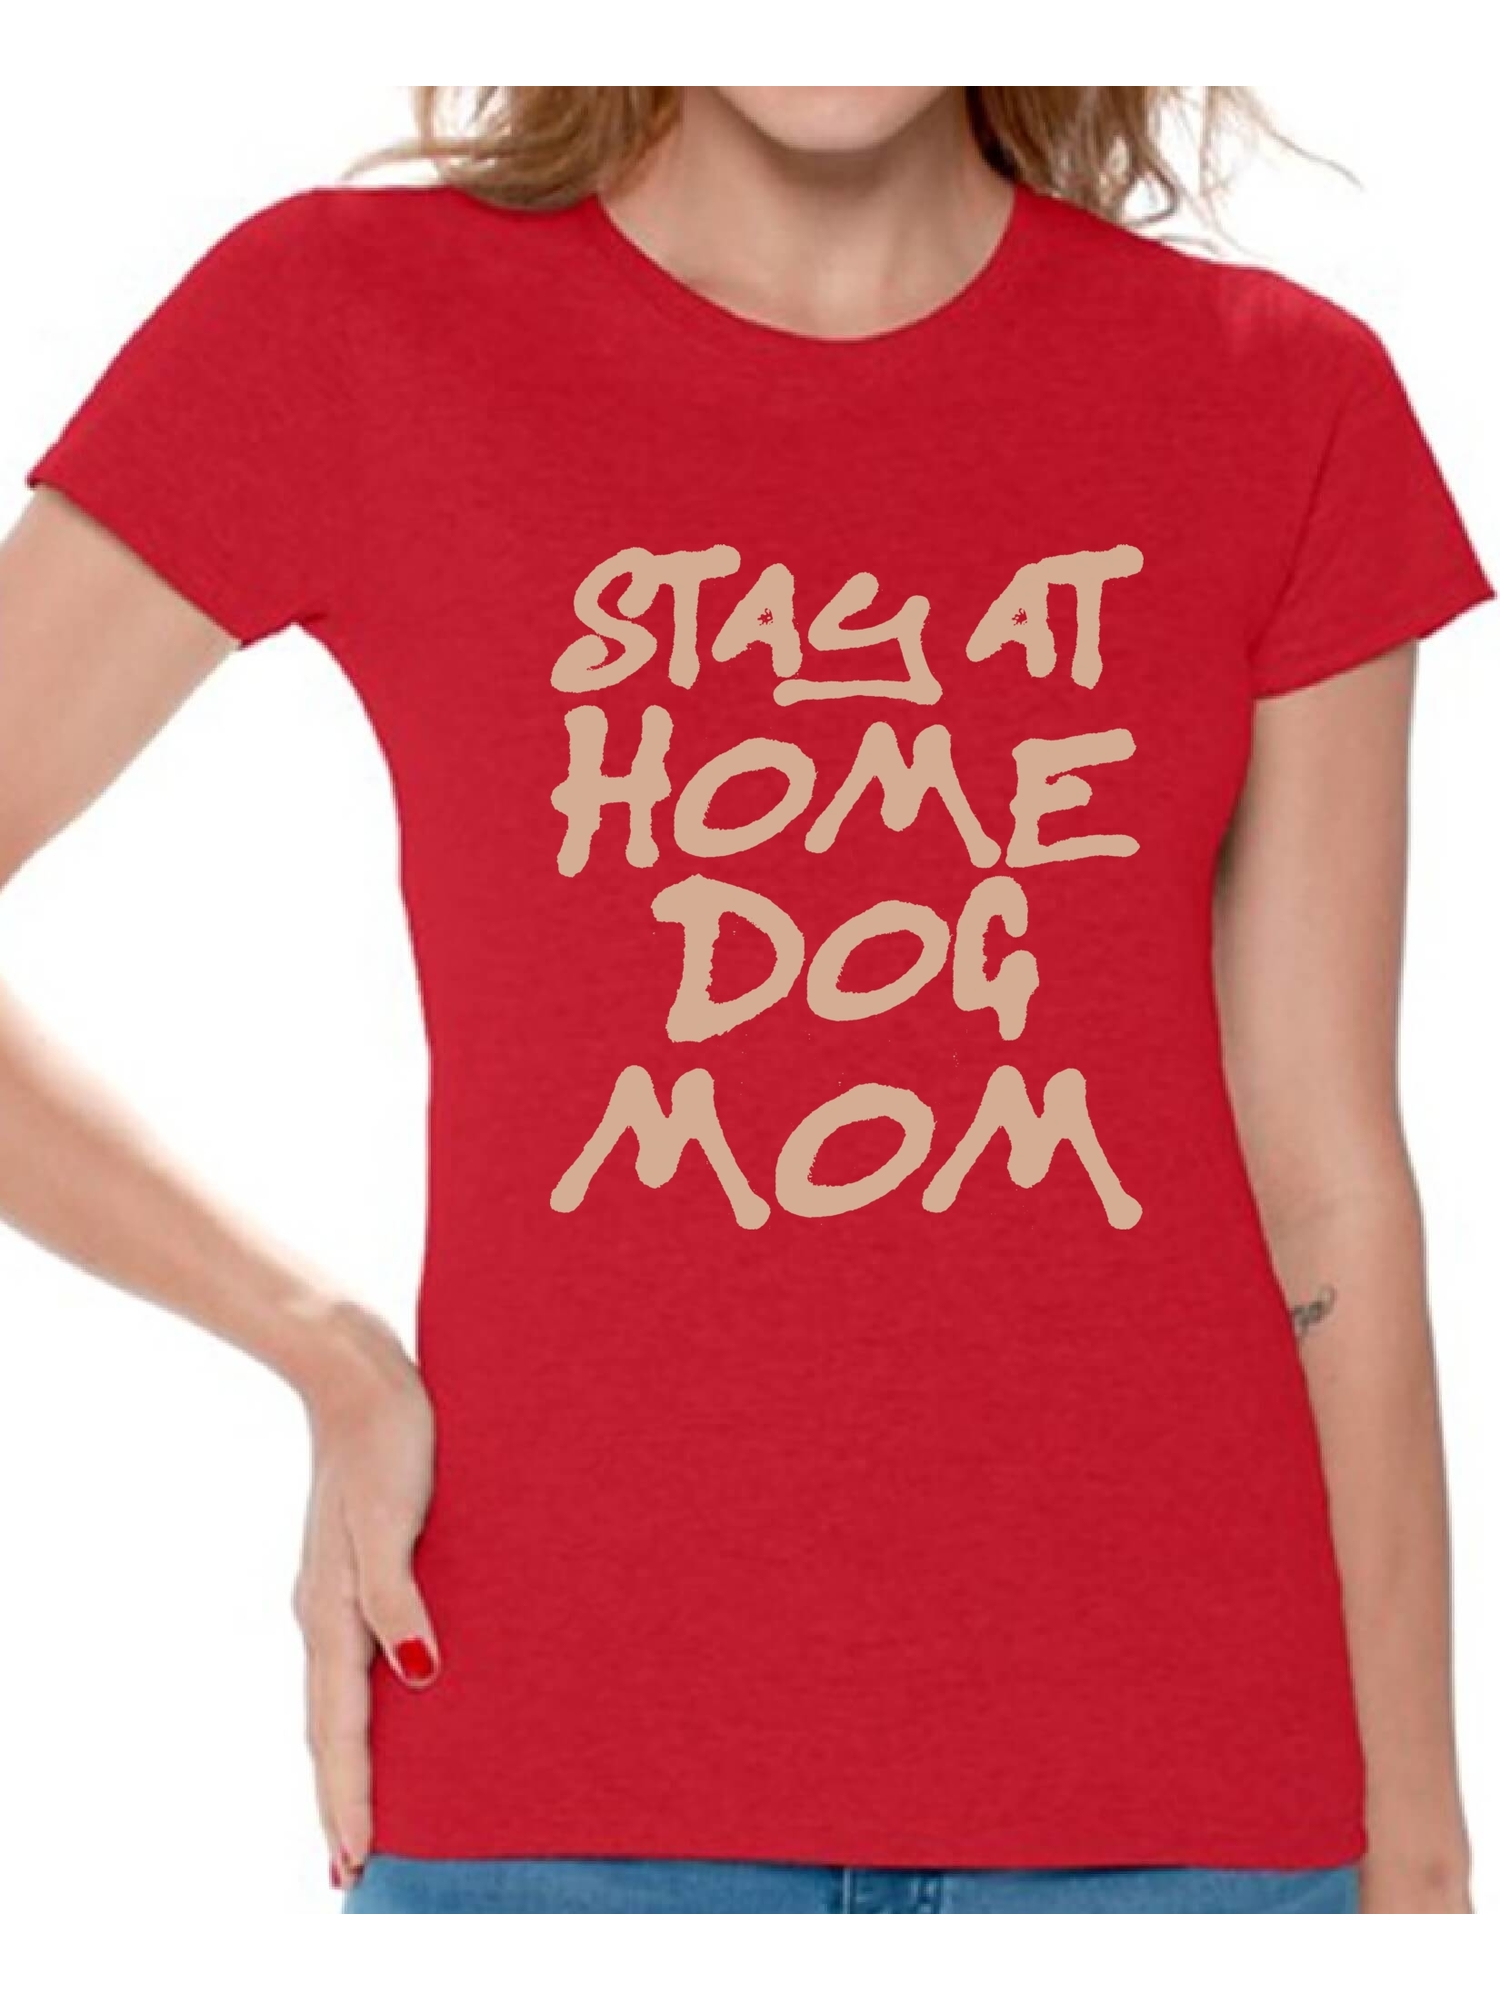 Awkward Styles Women's Stay At Home Dog Mom Graphic T-shirt Tops For Dog Lovers - image 1 of 4